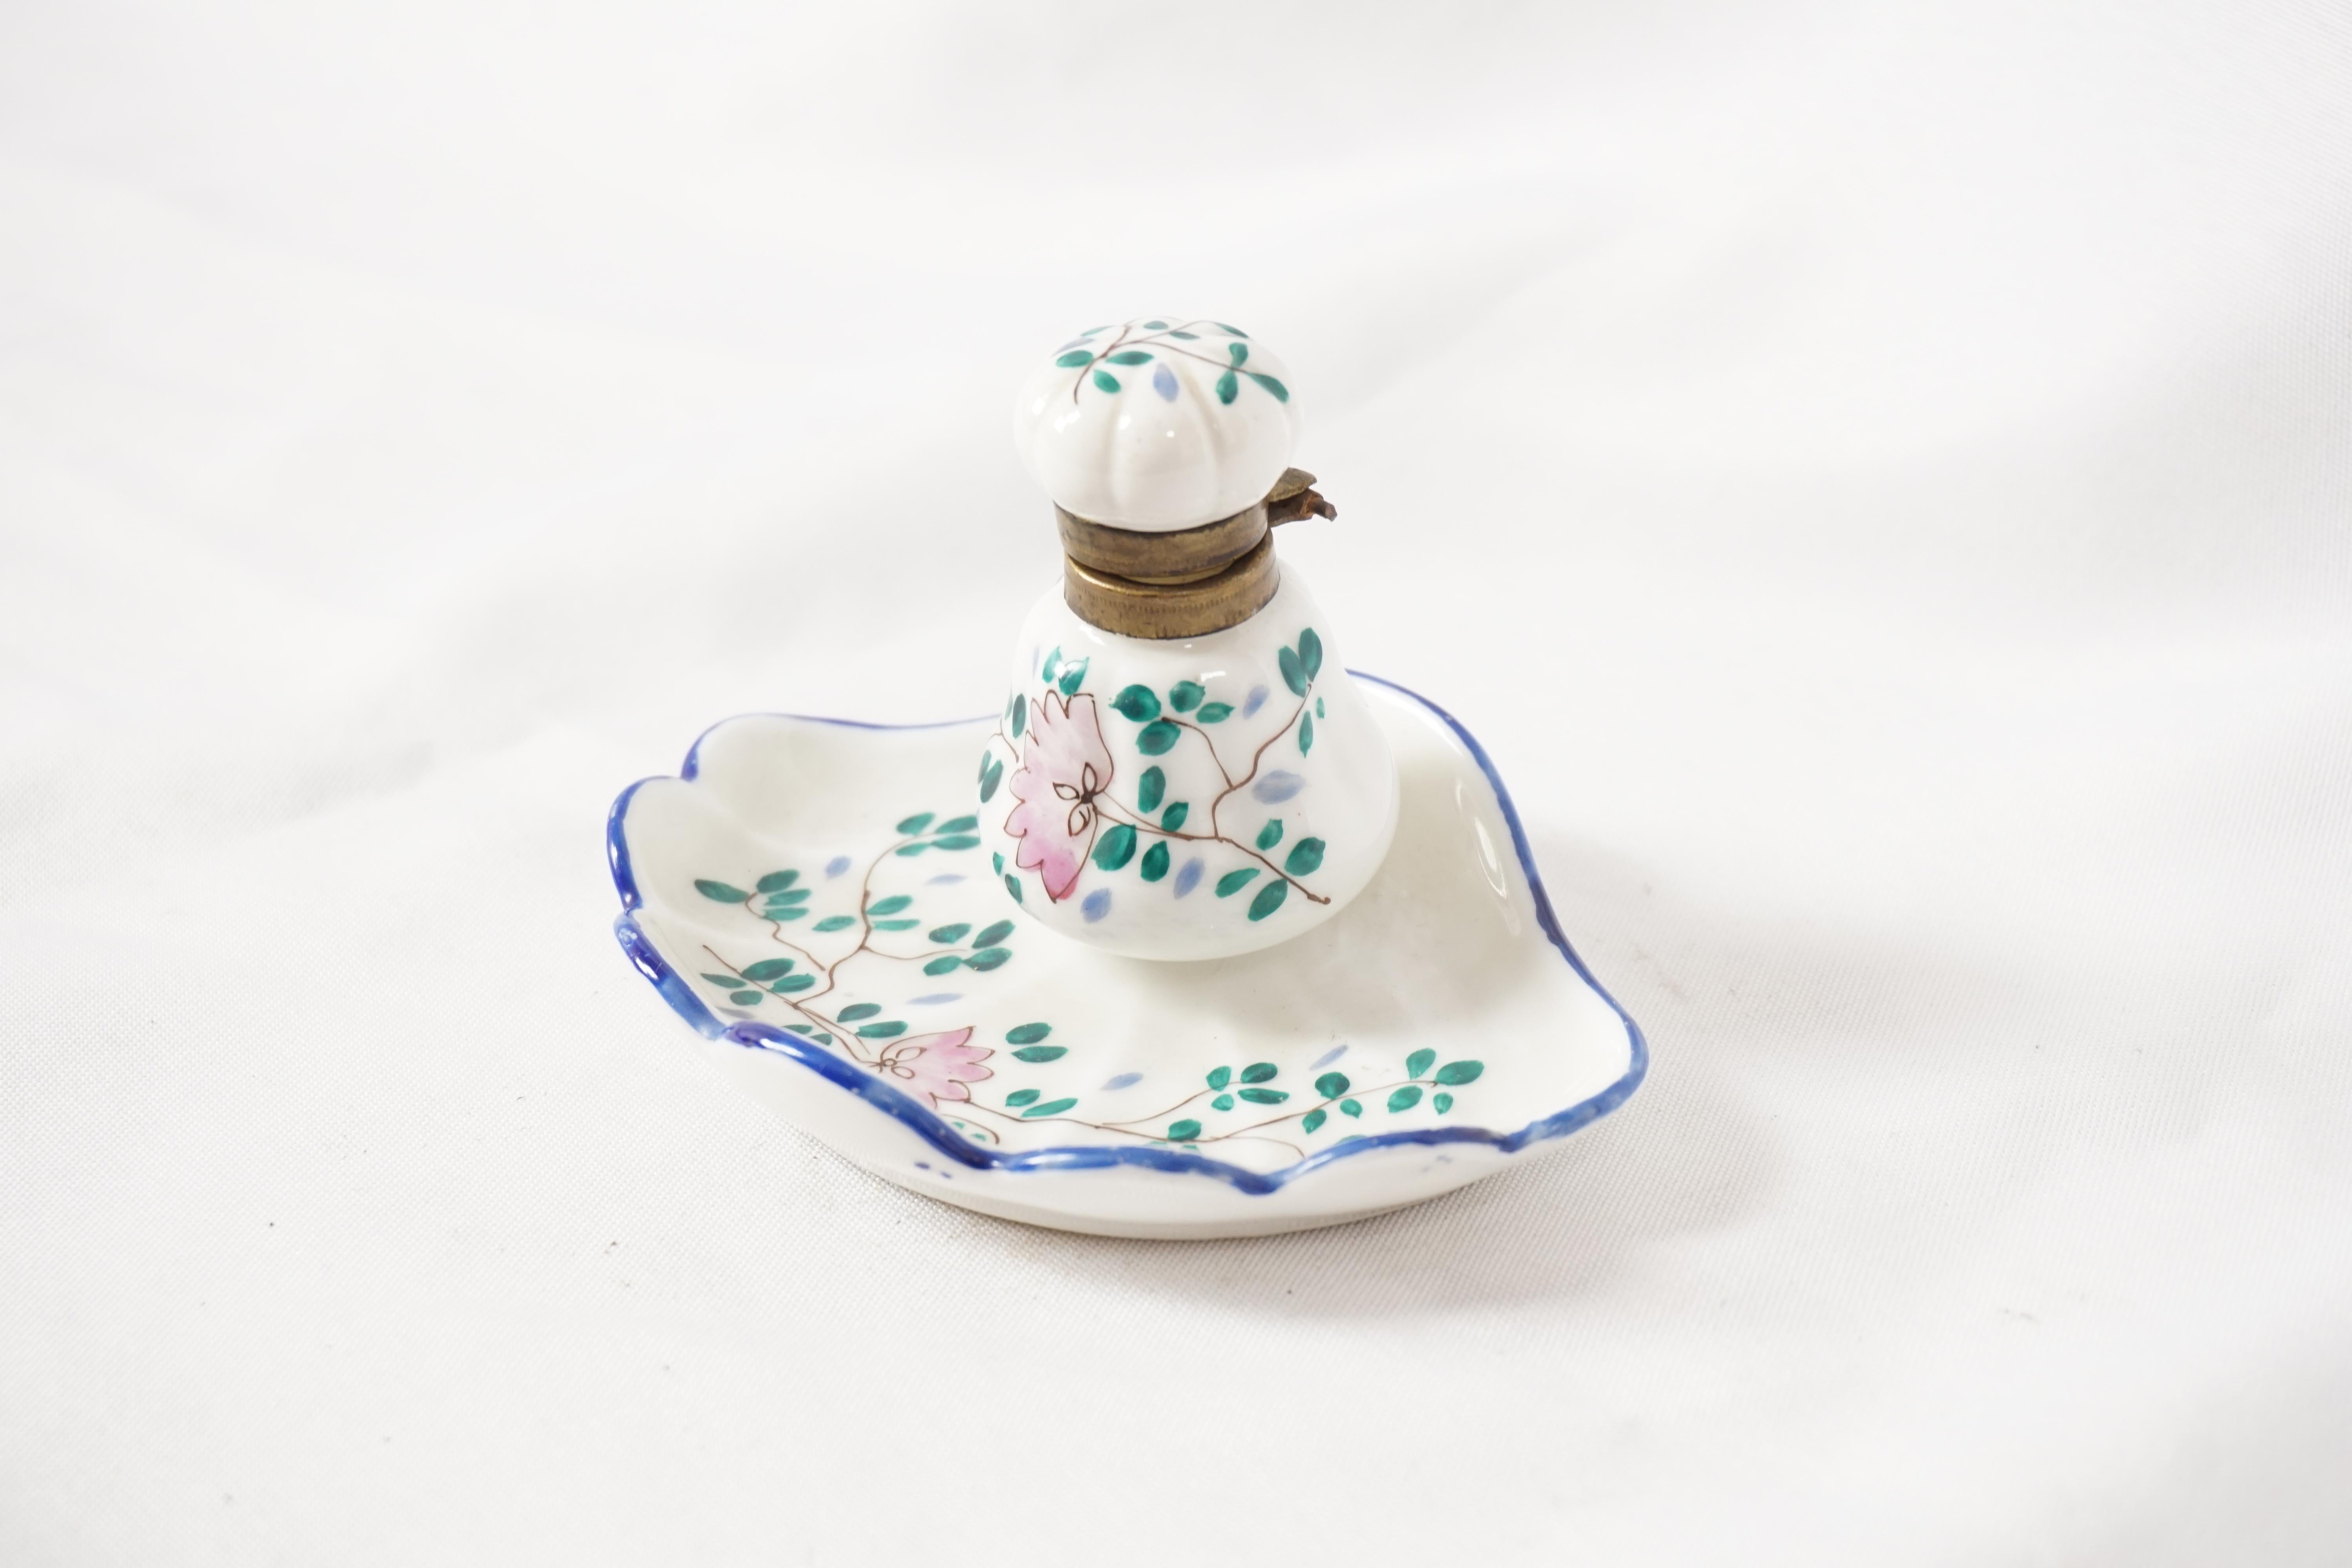 Vintage hand painted inkwell, China inkwell, Scotland 1930, H315

Scotland 1930
Hand painted inkwell with hinged lid
Lovely hand painted flowers
Nice condition no crack or chips

Measures: 4